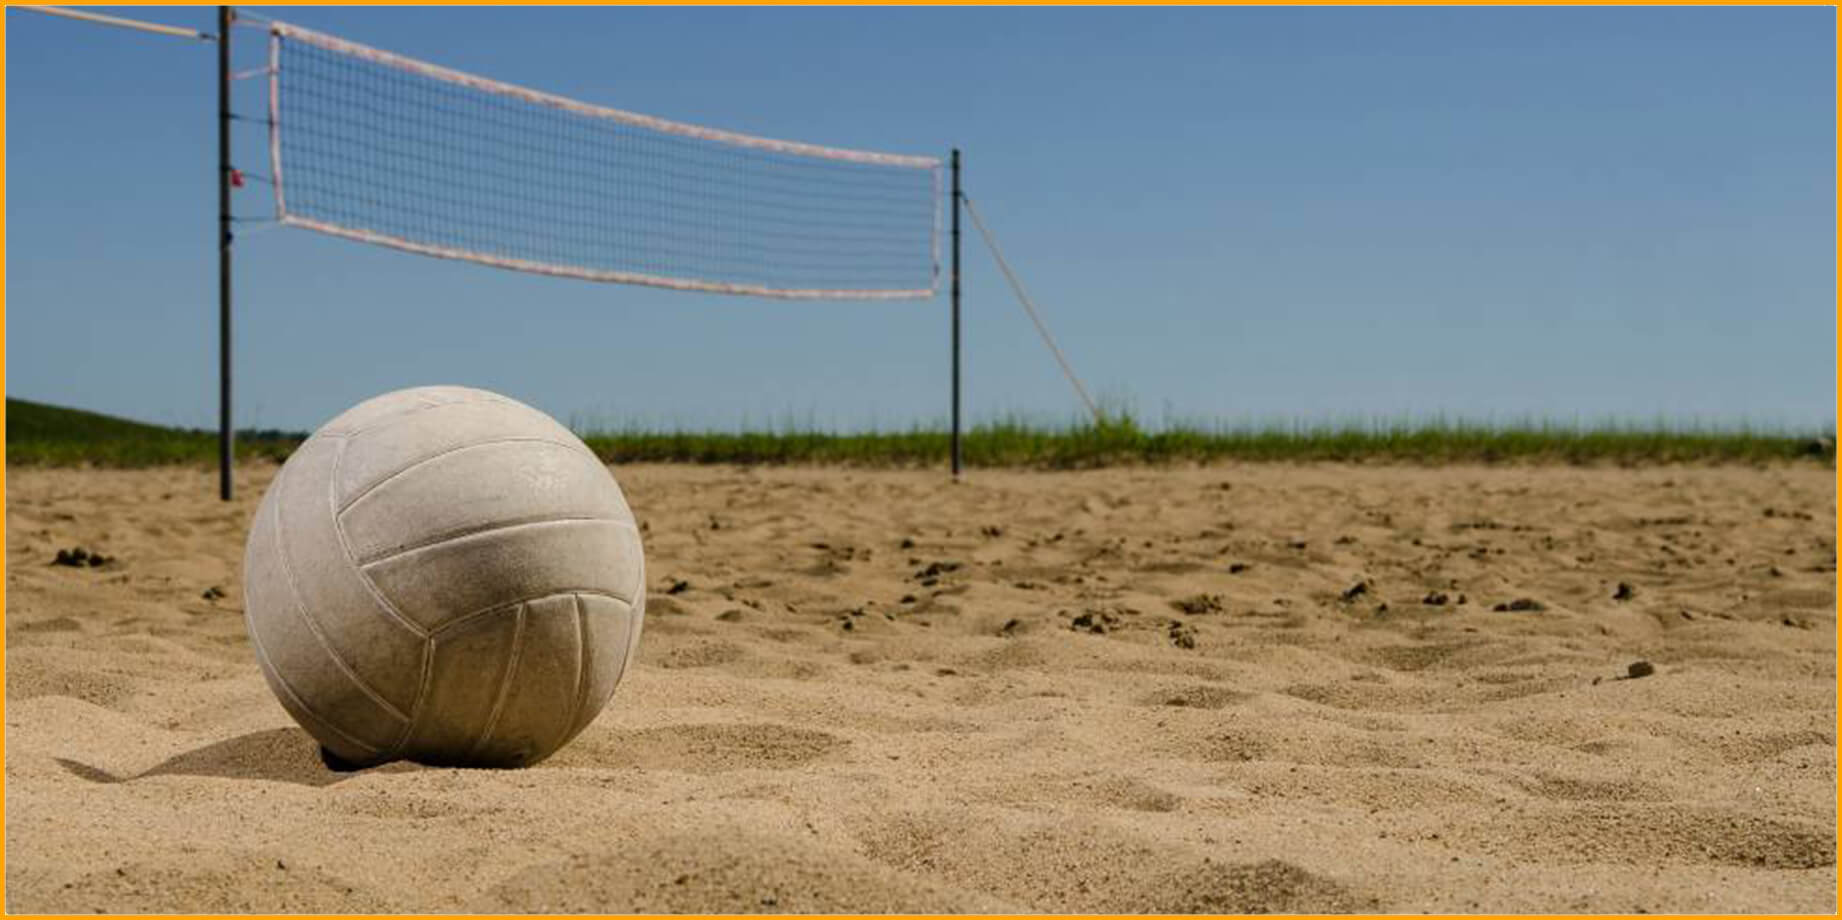 Beach Volley, Beach Tennis and Beach Soccer - Care Cleaning and Reclamation